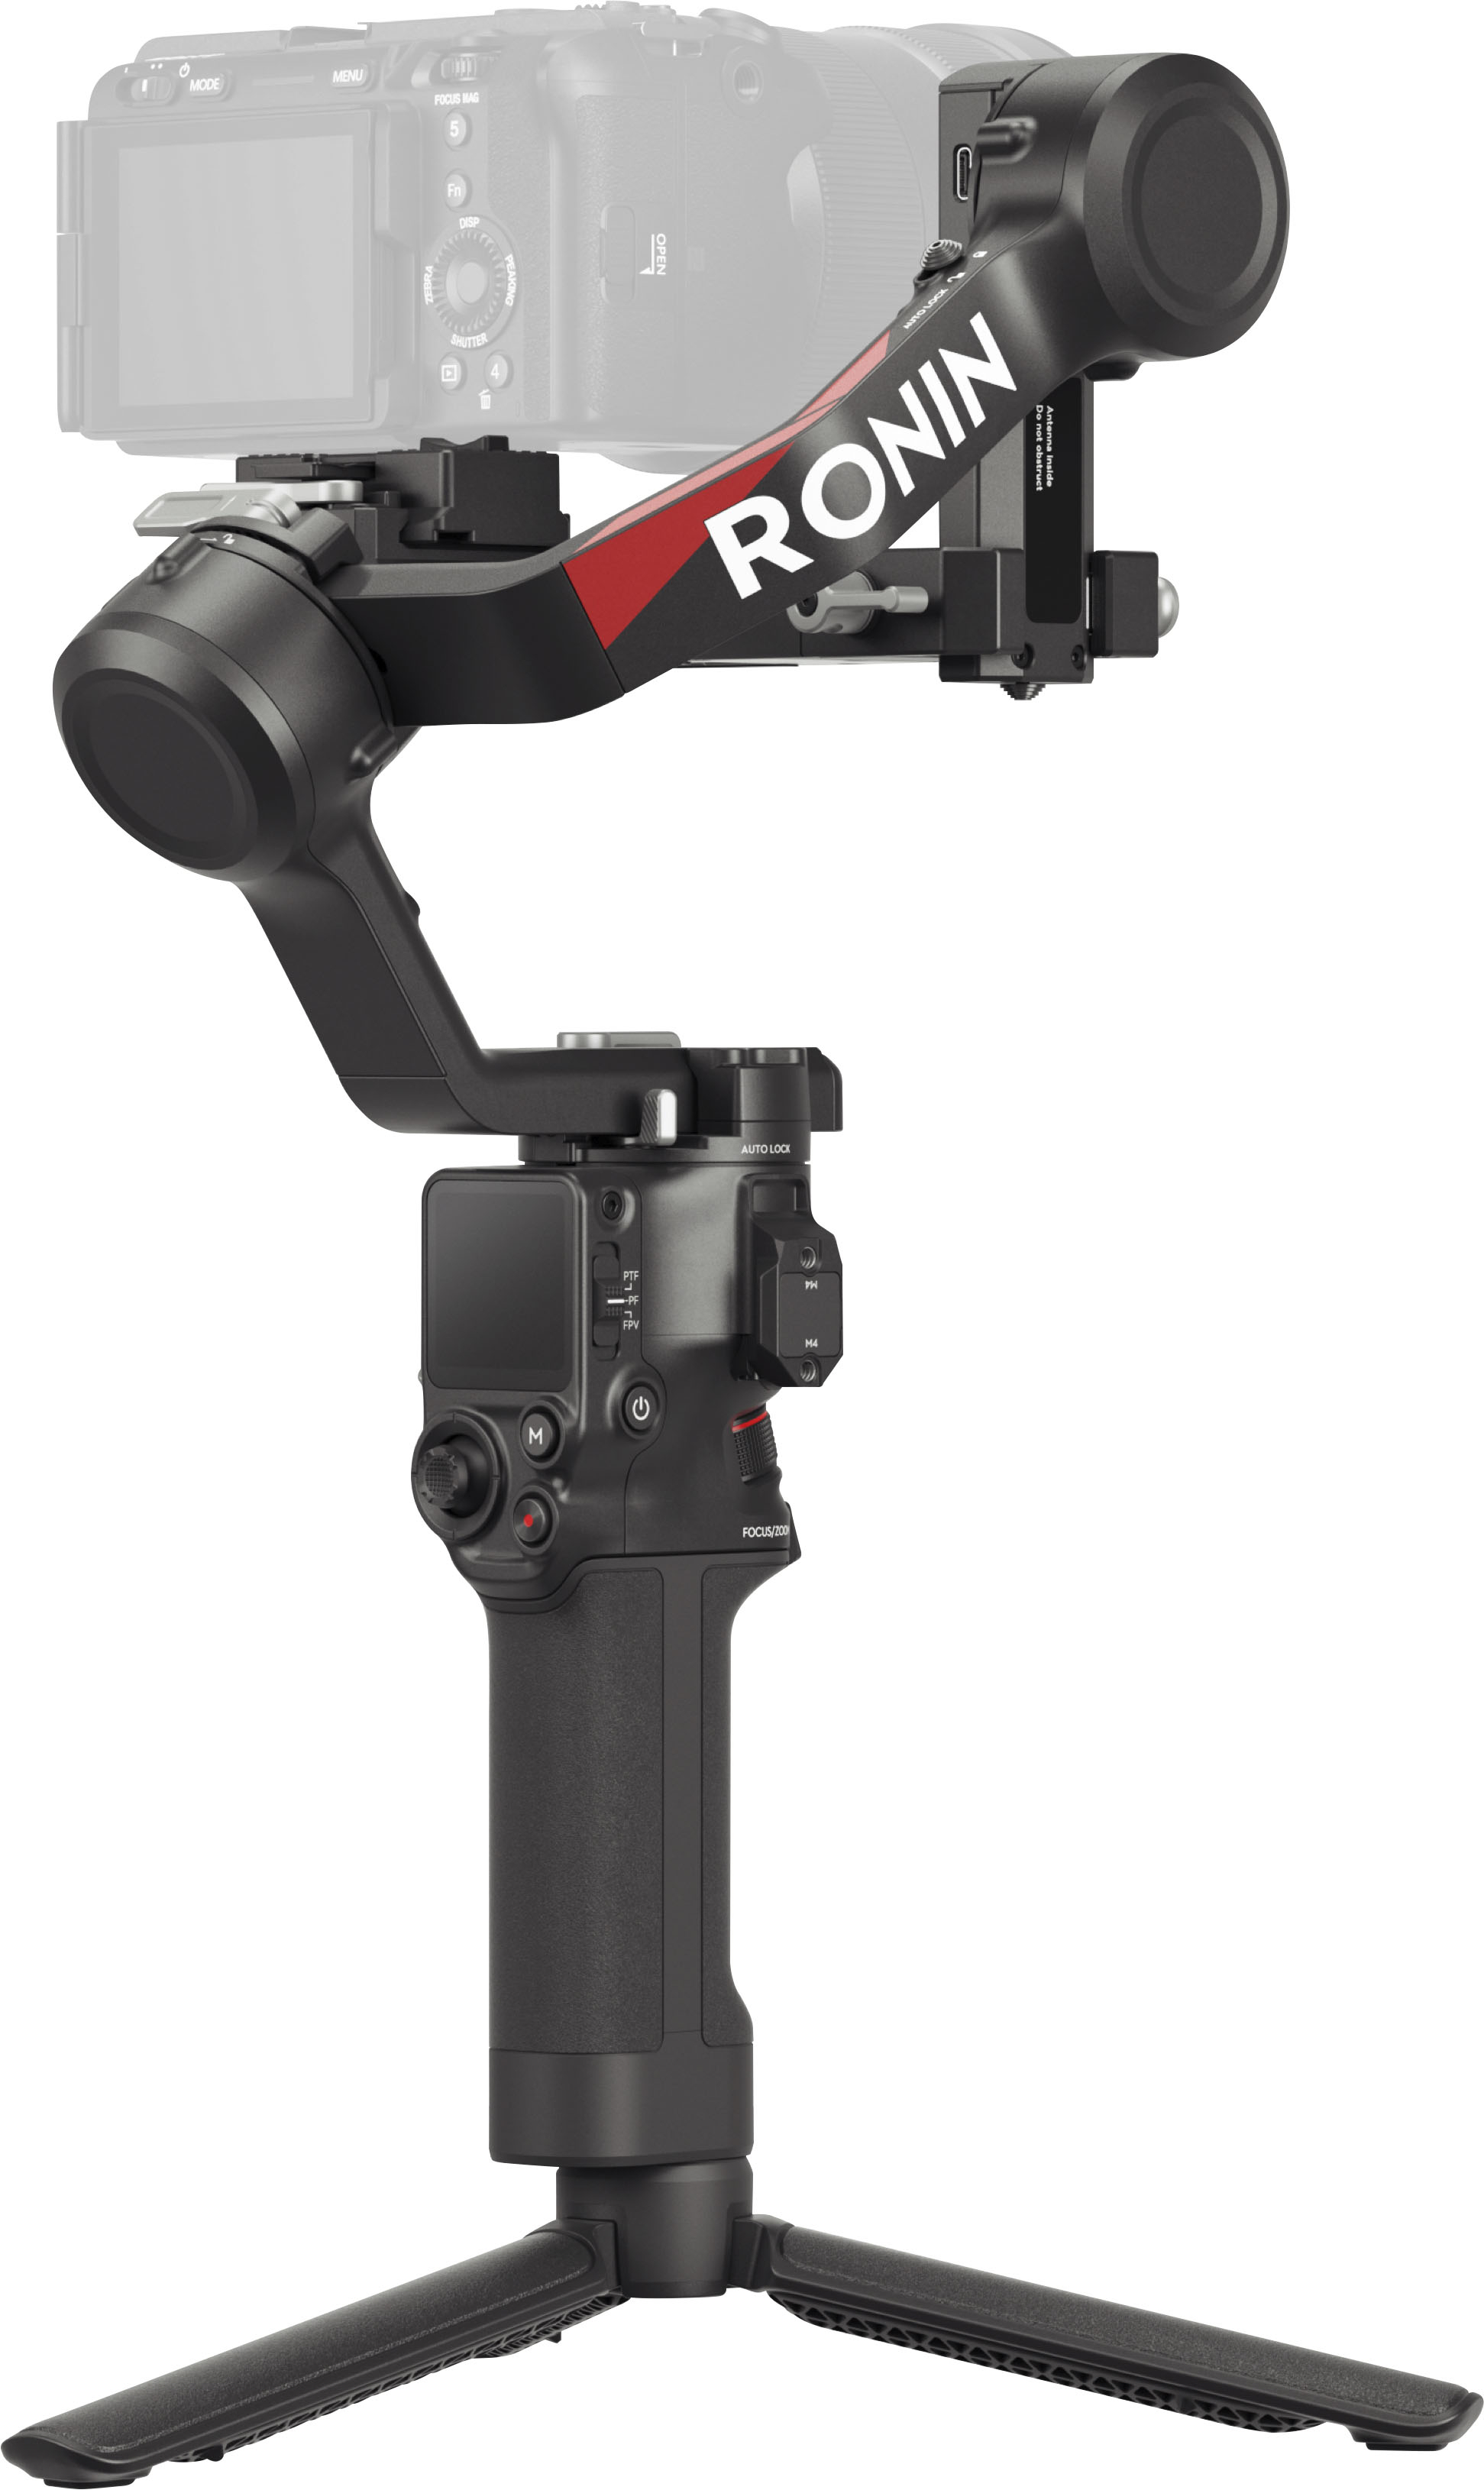 Angle View: DJI - RS 4 Combo 3-Axis Gimbal Stabilizer for Cameras - Black